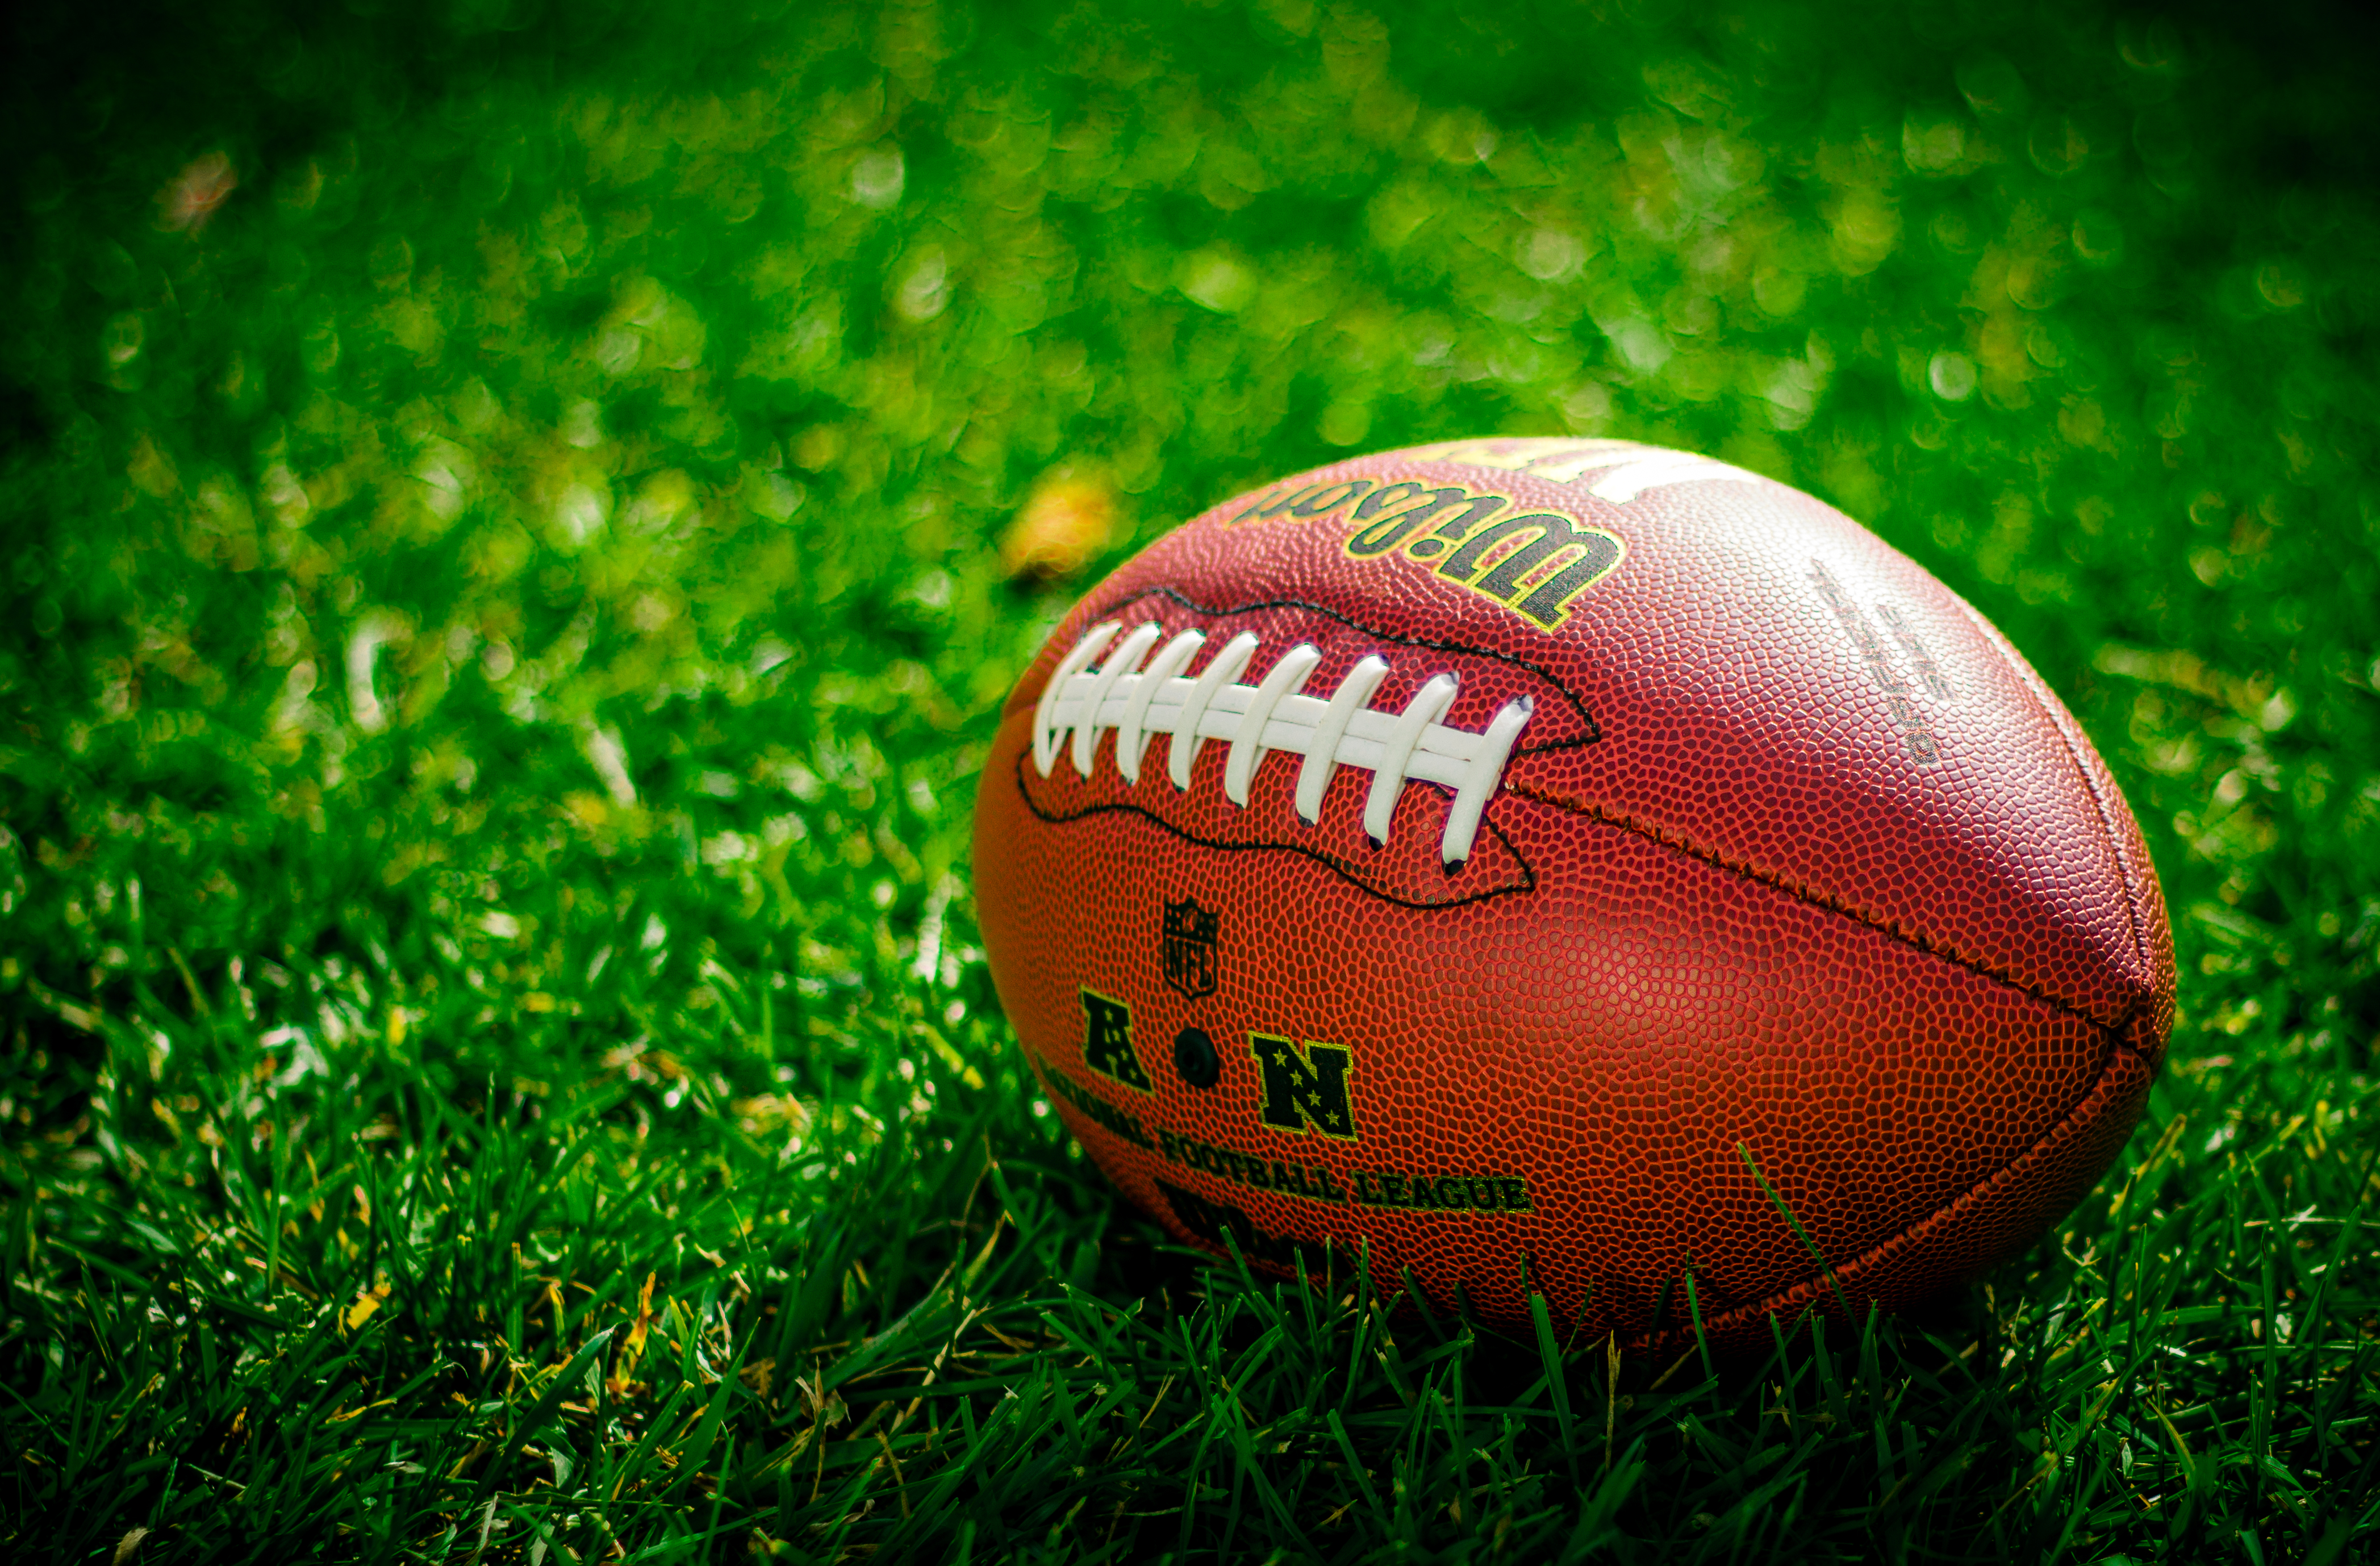 Widescreen image sports, rugby, lawn, football